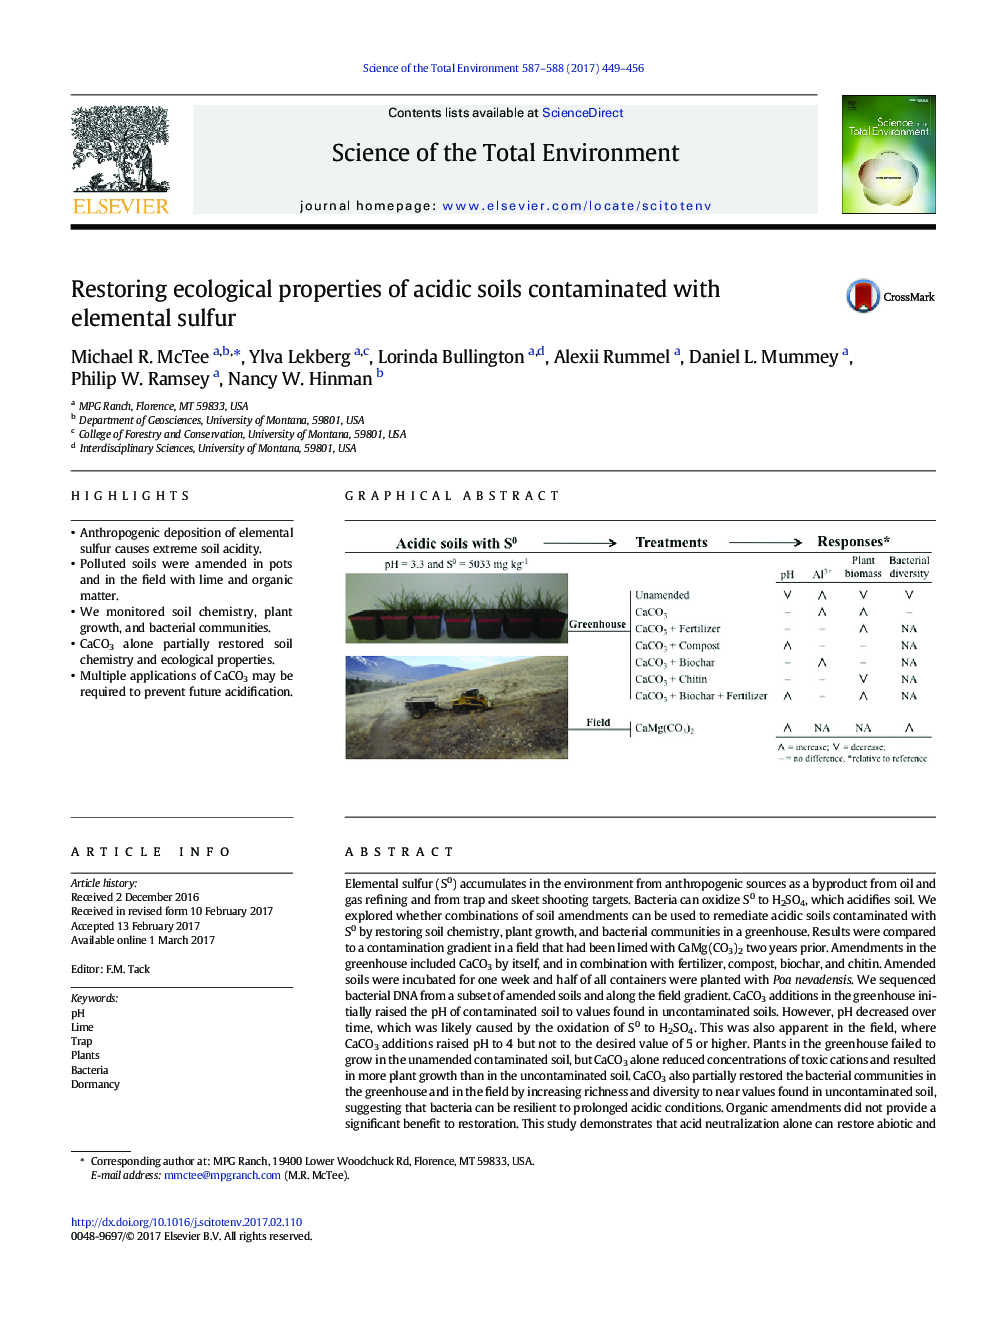 Restoring ecological properties of acidic soils contaminated with elemental sulfur